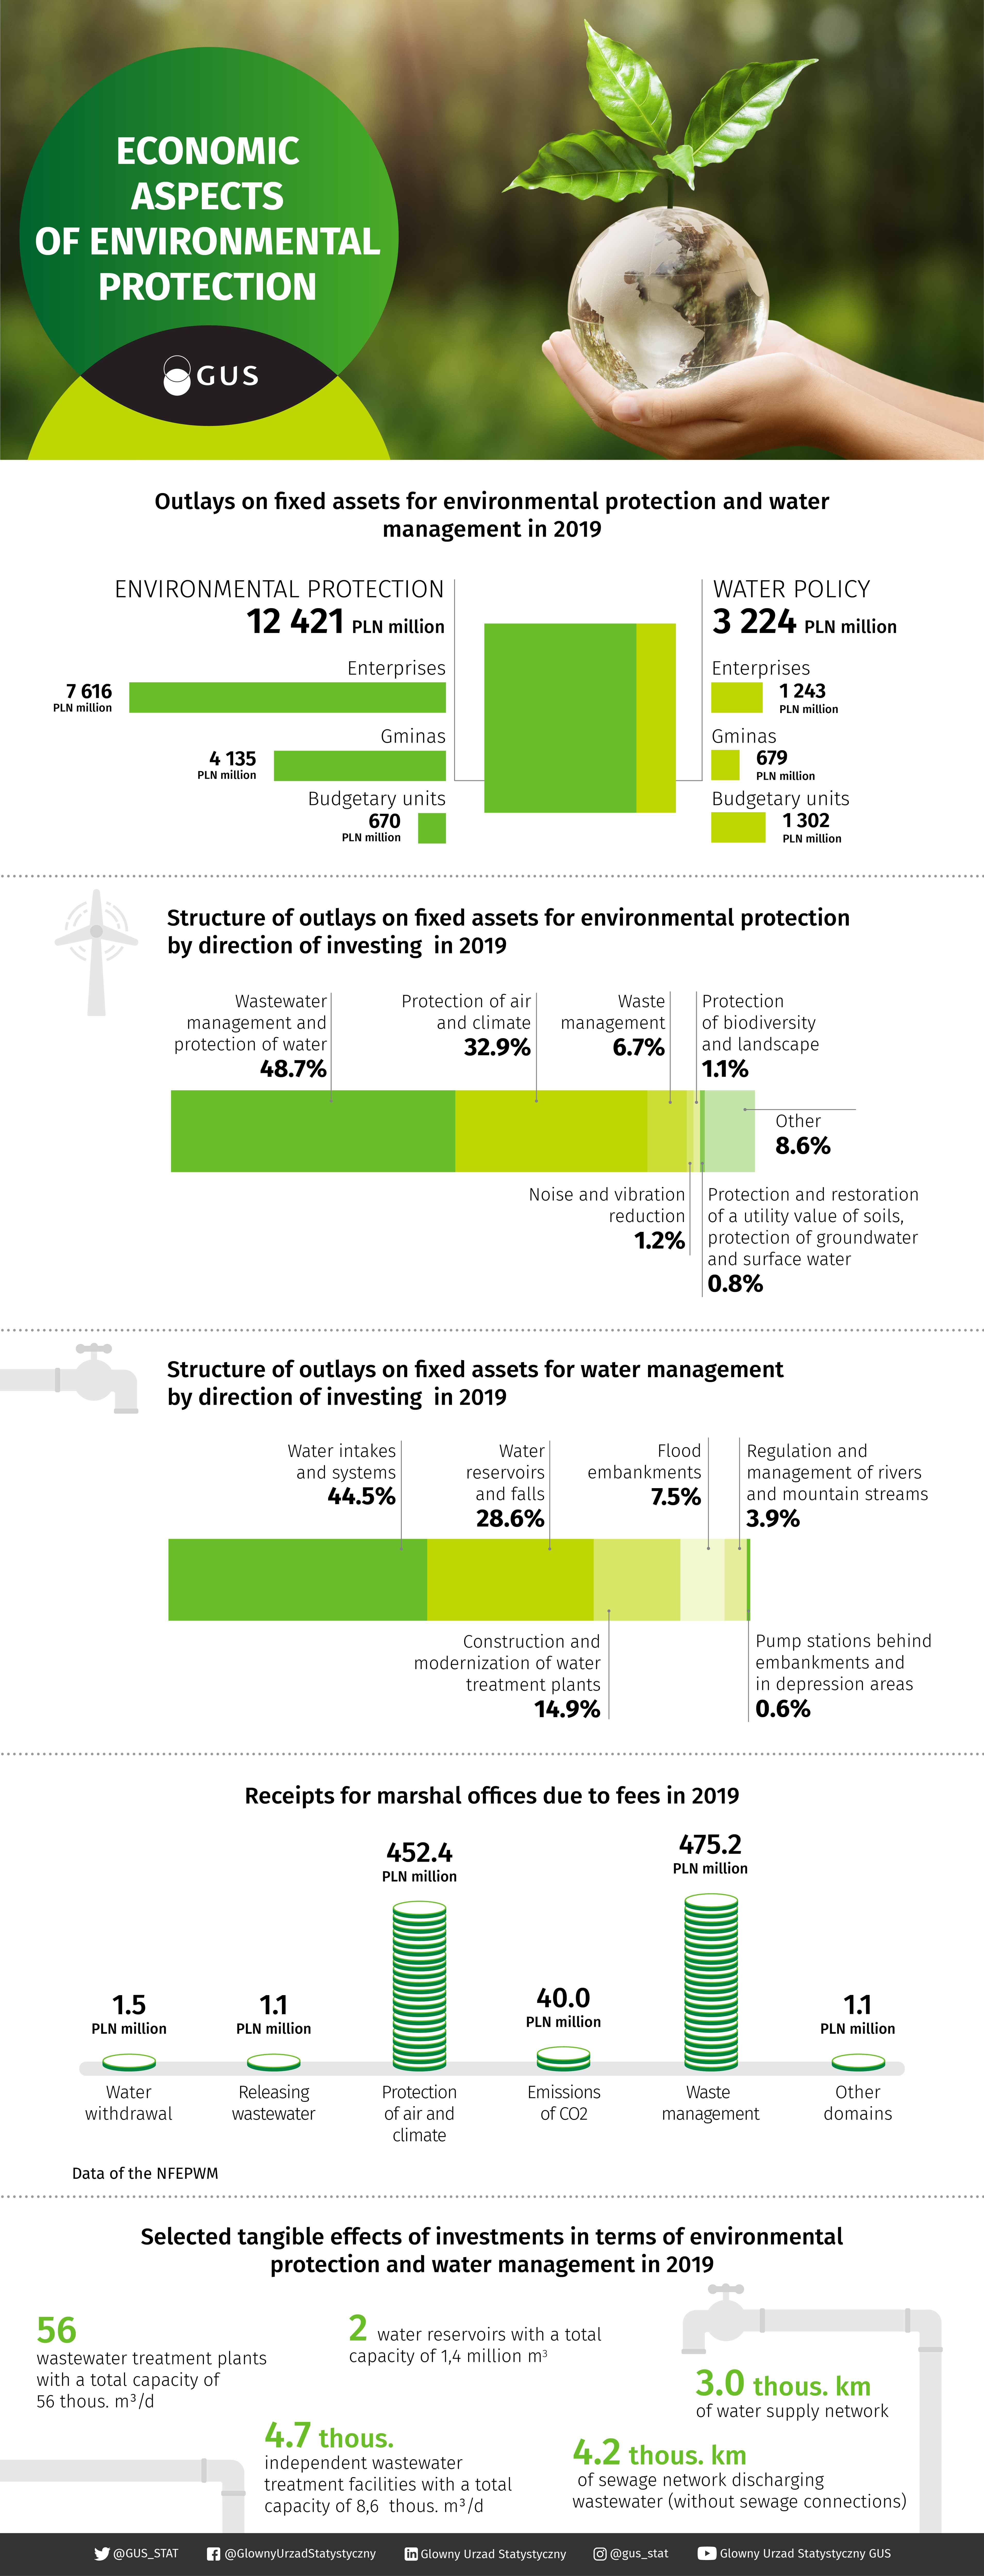 Infographic - Economic aspects of environmental protection. Data for the infographic can be found in the Excel file attached below